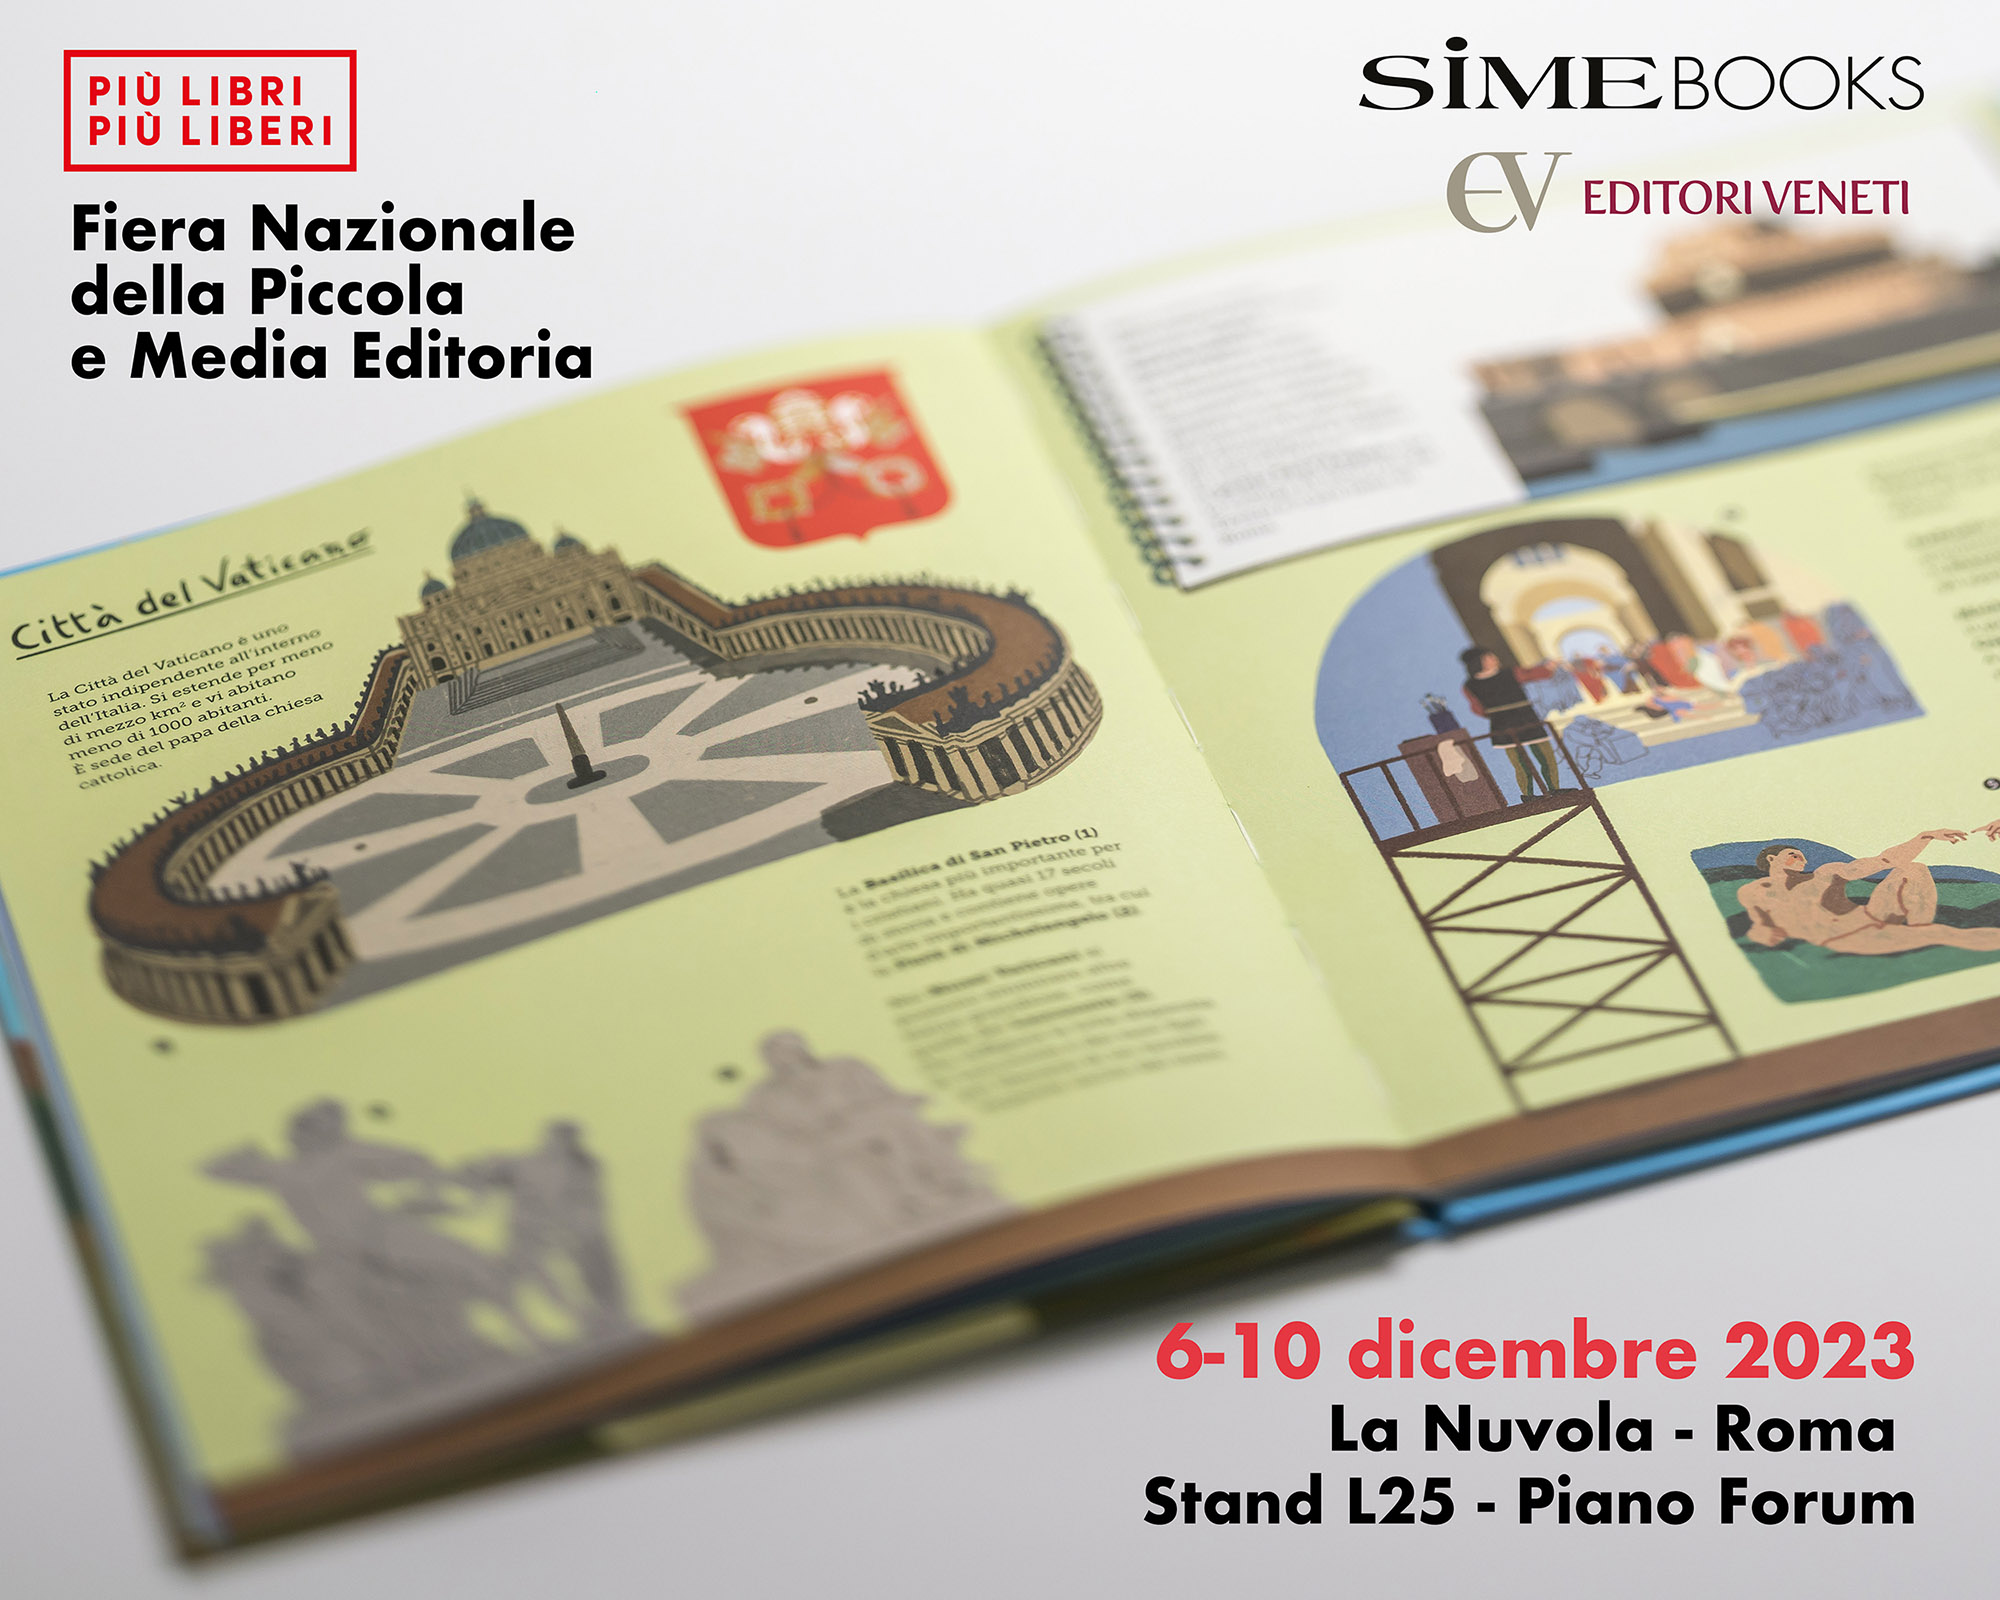 Sime Books at Più libri liberi, 6 - 10 December 2023 You can find us on the Forum Level of the La Nuvola Congress Center, Stand L25